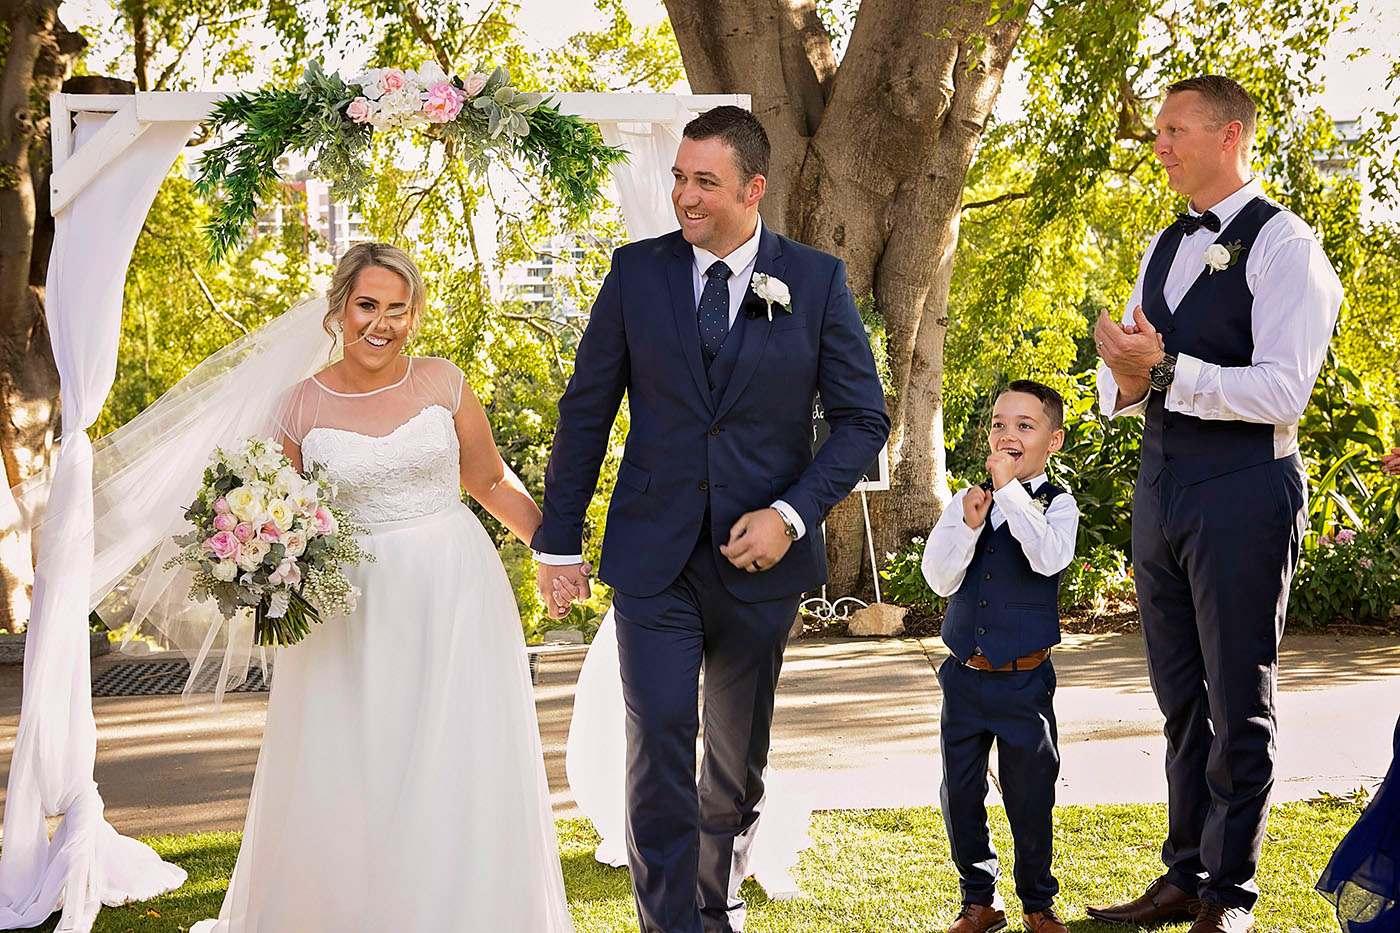 Victoria Park Wedding With Every Heartbeat